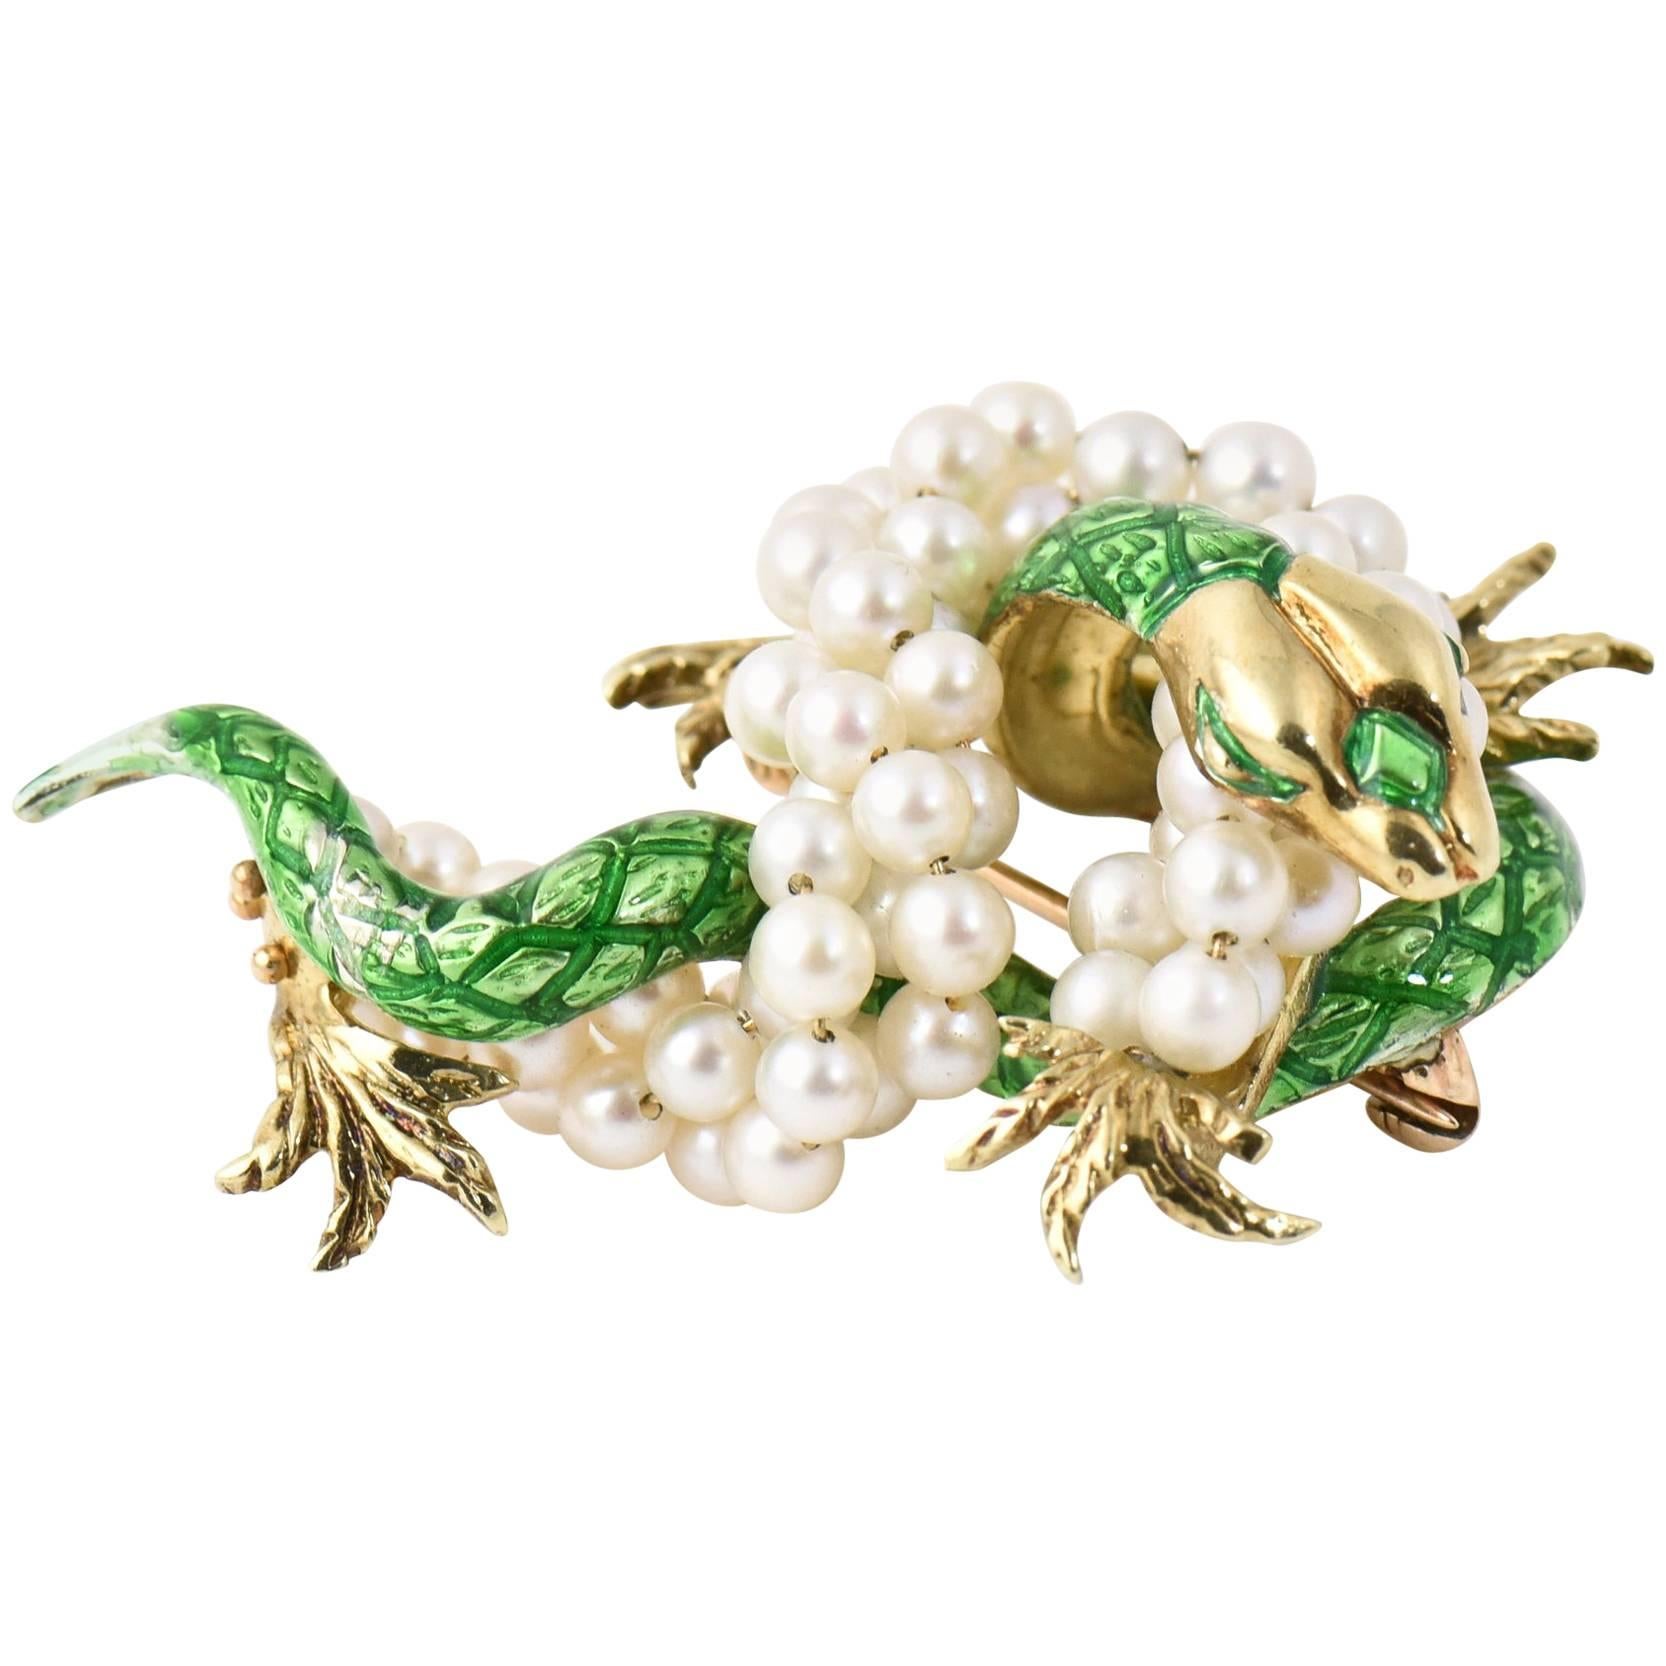 Green Enamel Gold Snake Brooch with Cultured Pearl Accents